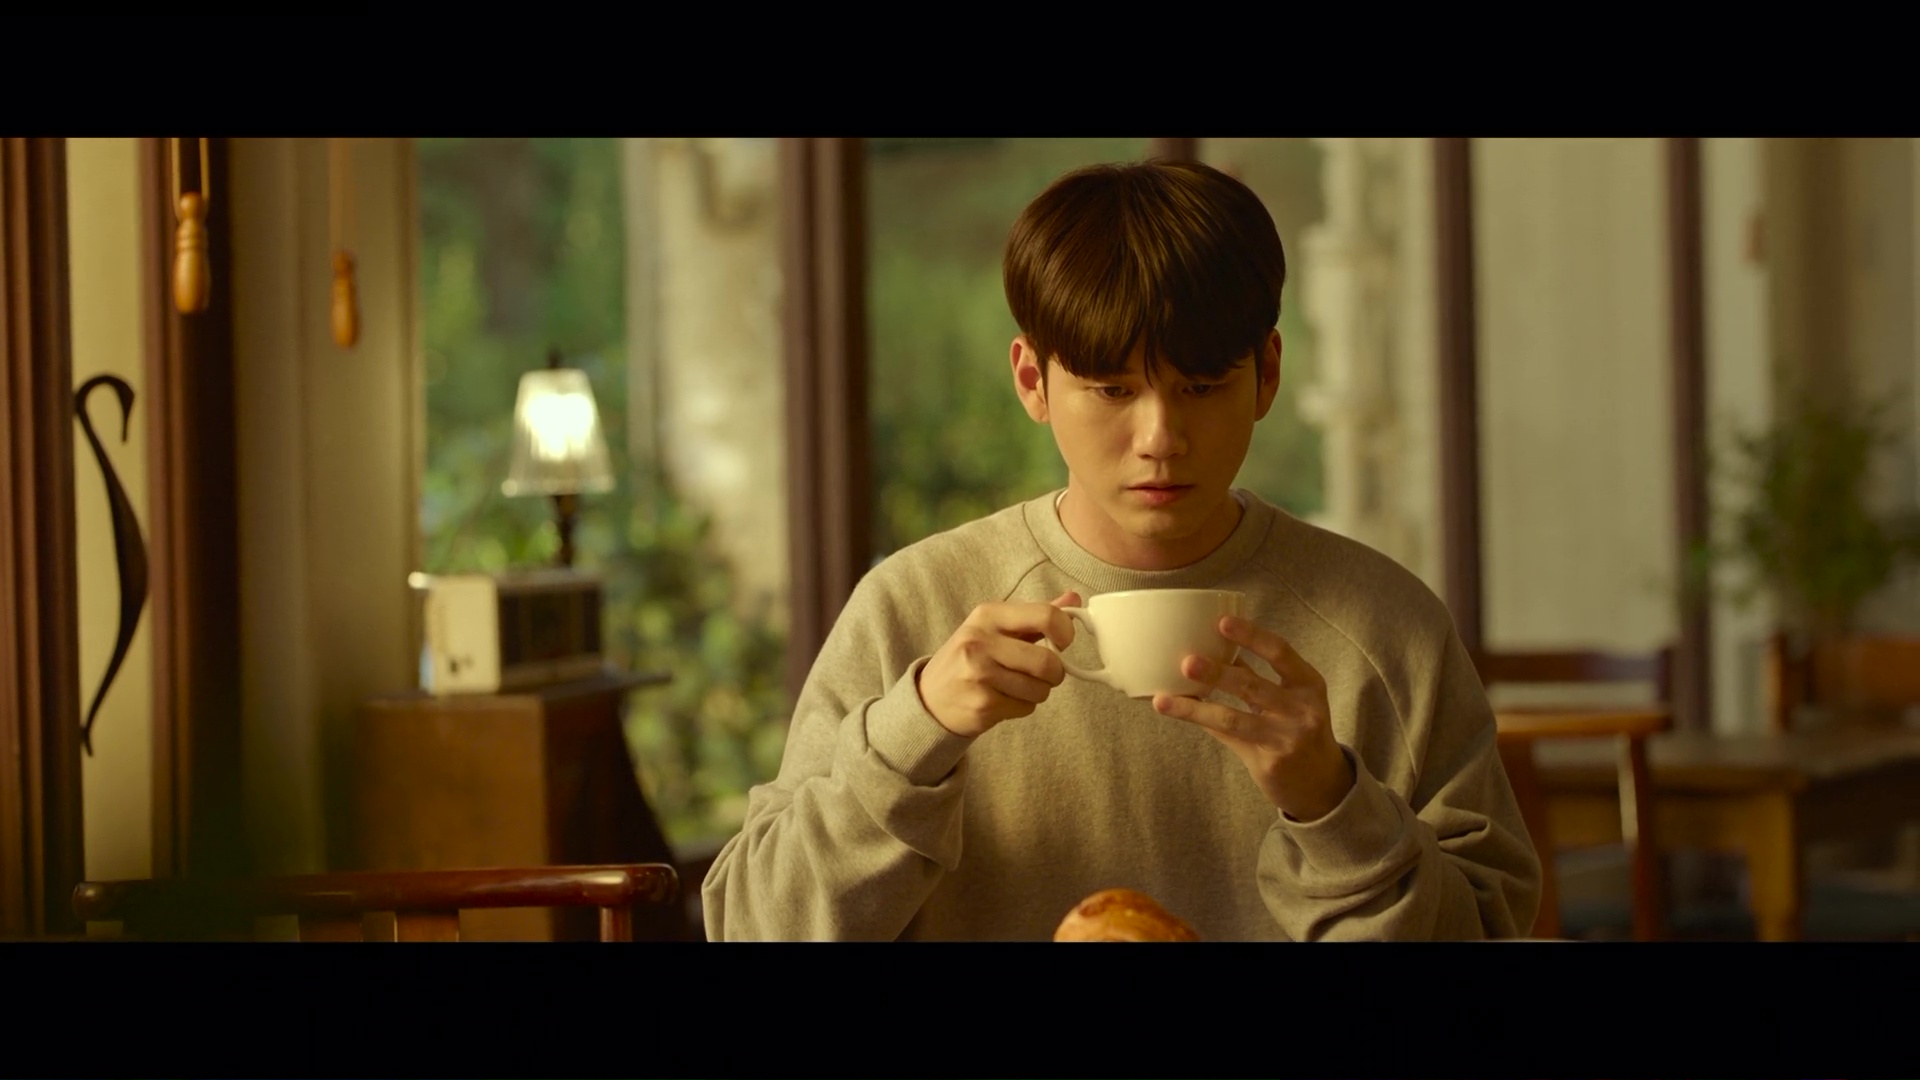 Would You Like a Cup of Coffee: Episodes 1-2 (Review)